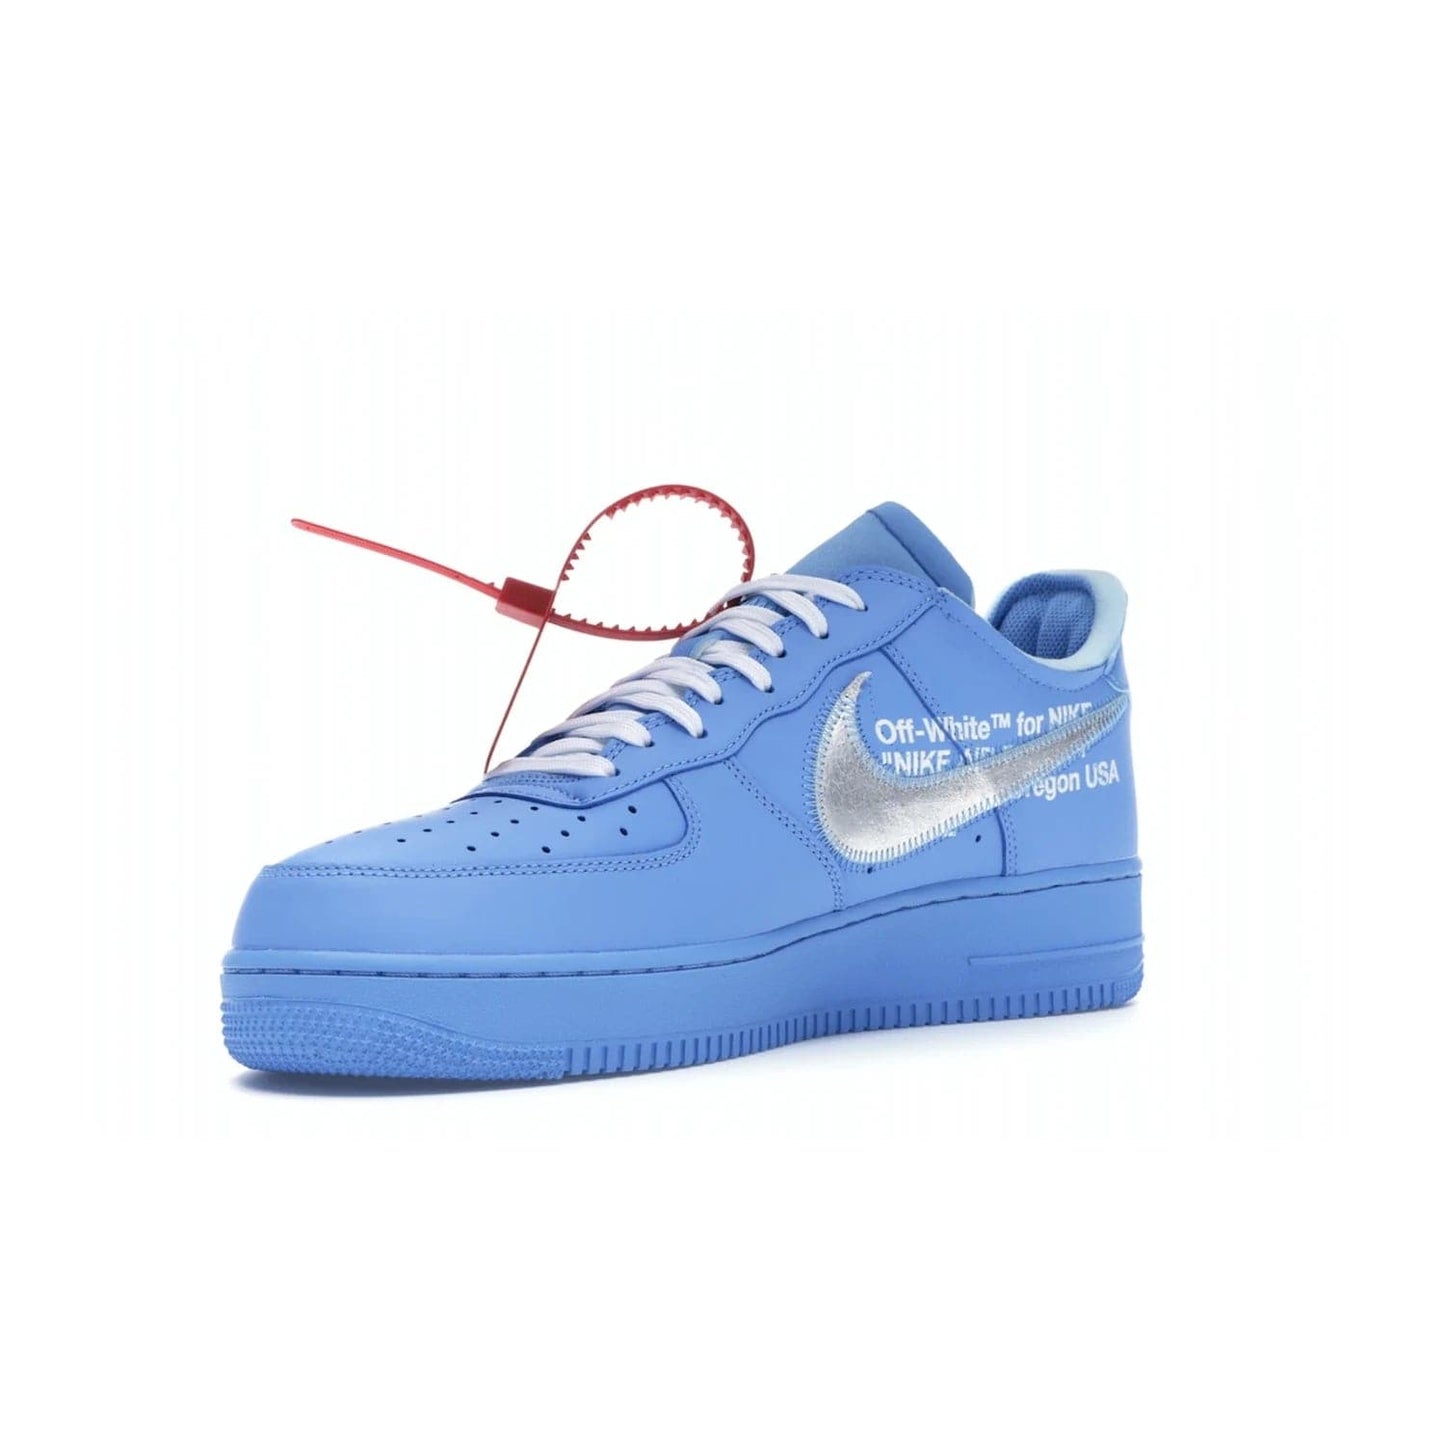 Nike Air Force 1 Low Off-White MCA University Blue - Image 15 - Only at www.BallersClubKickz.com - Virgil Abloh's Air Force 1 Low Off-White MCA University Blue: Features University Blue leather and midsole, reflective silver Nike Swoosh, red zip tie, white laces, and iconic Off-White™ branding. A must-have for any Virgil Abloh enthusiast.